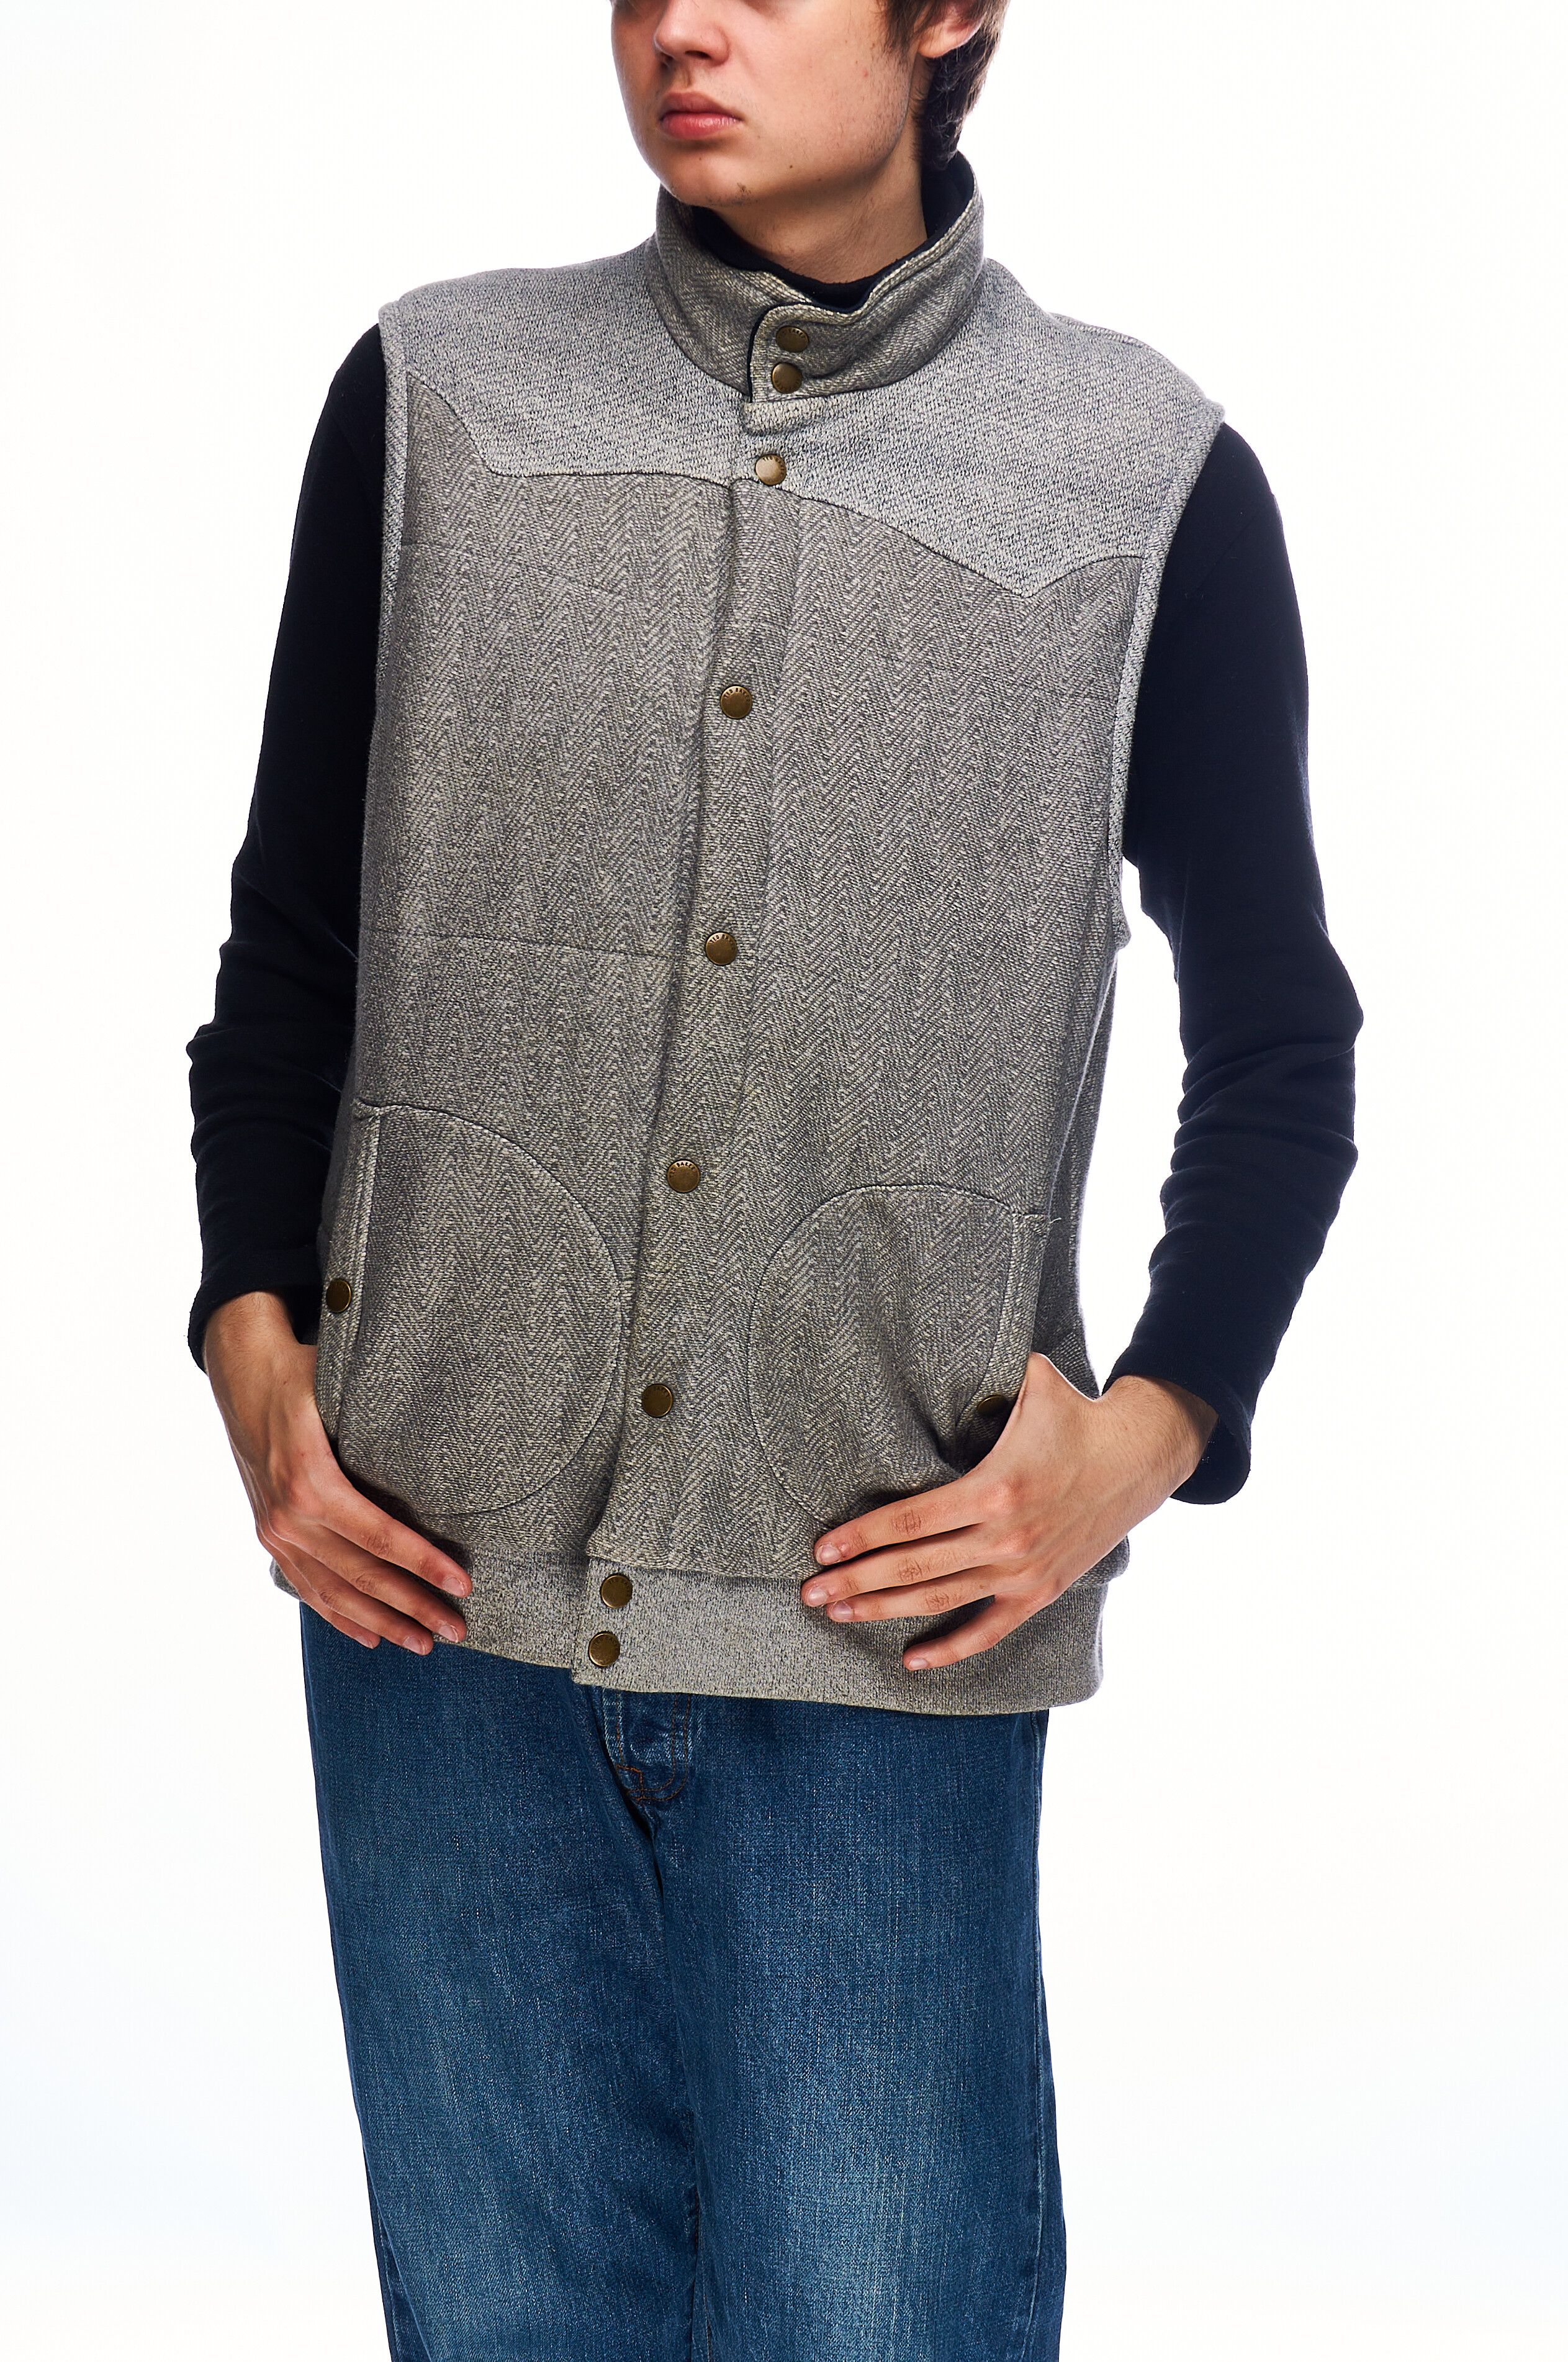 Ted Baker TED BAKER Vest Grey Mens Hunting Waistcoat Size 5 / L Size US L / EU 52-54 / 3 - 1 Preview